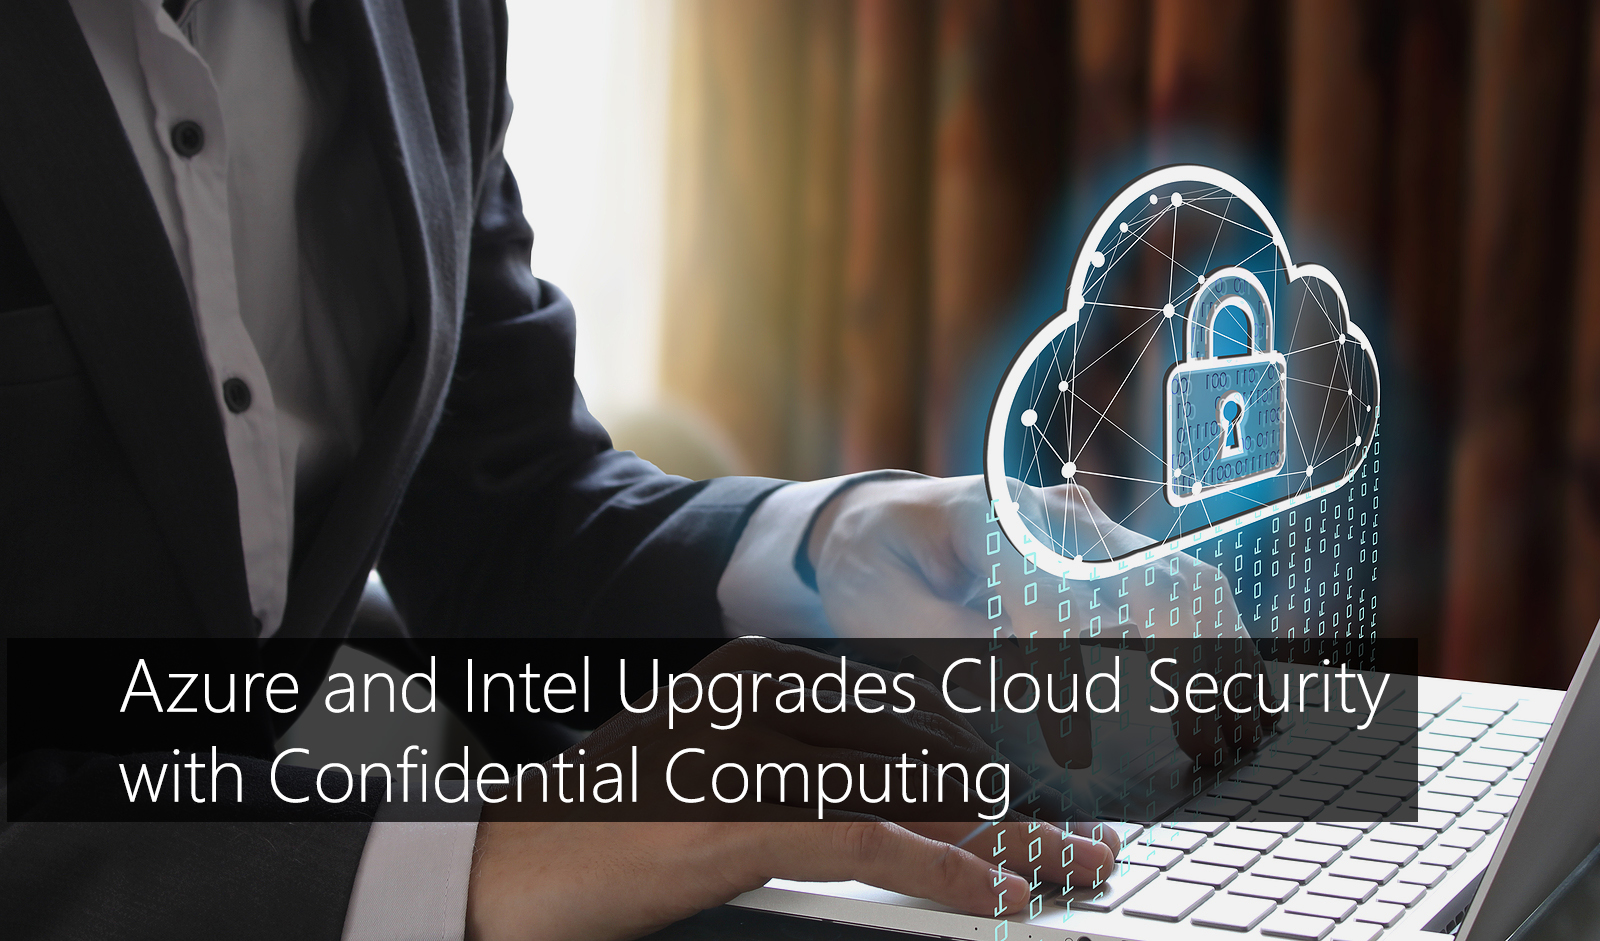 tmc-blog-azure-and-intel-upgrades-cloud-security-with-confidential-computing